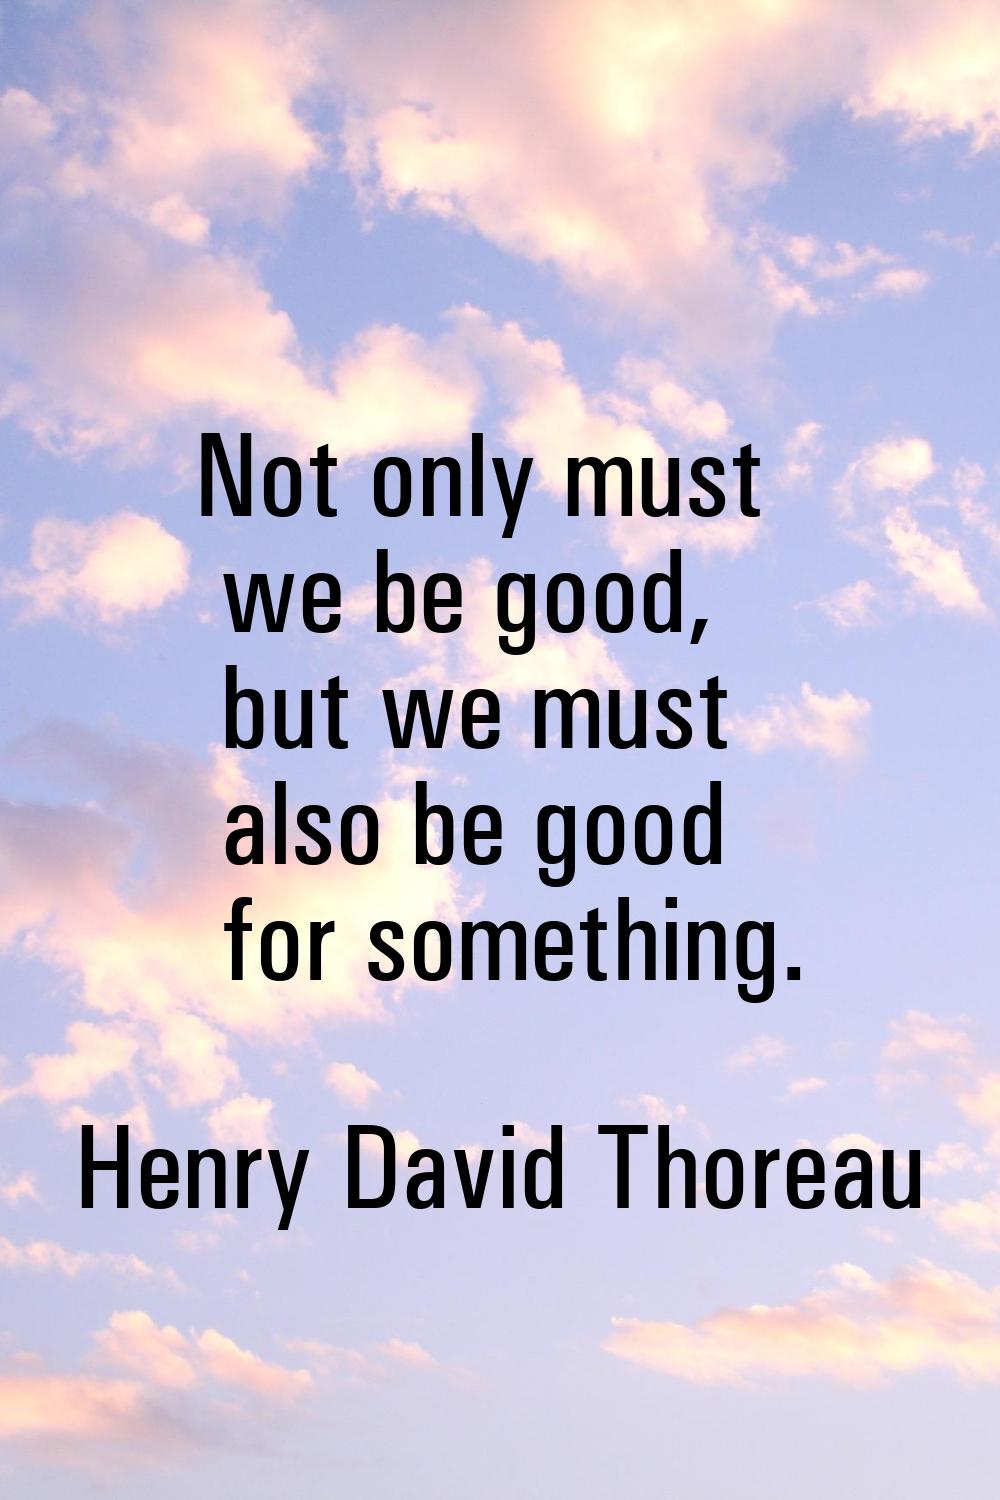 Not only must we be good, but we must also be good for something.